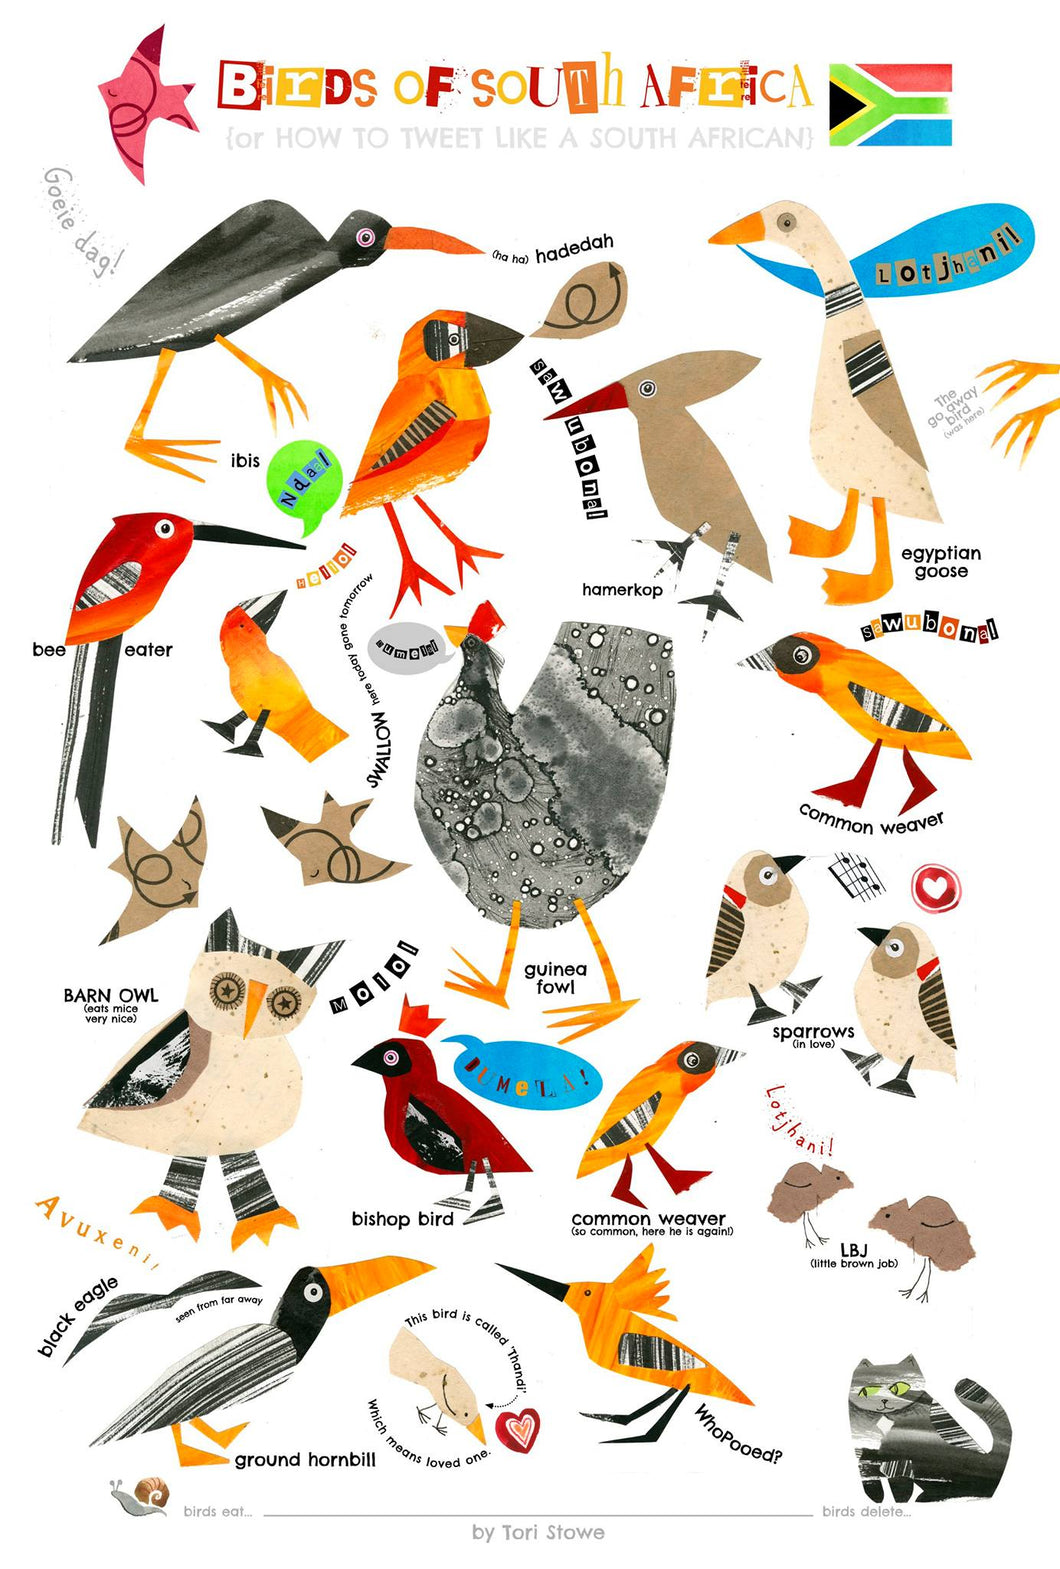 Common South African Birds by Tori Stowe